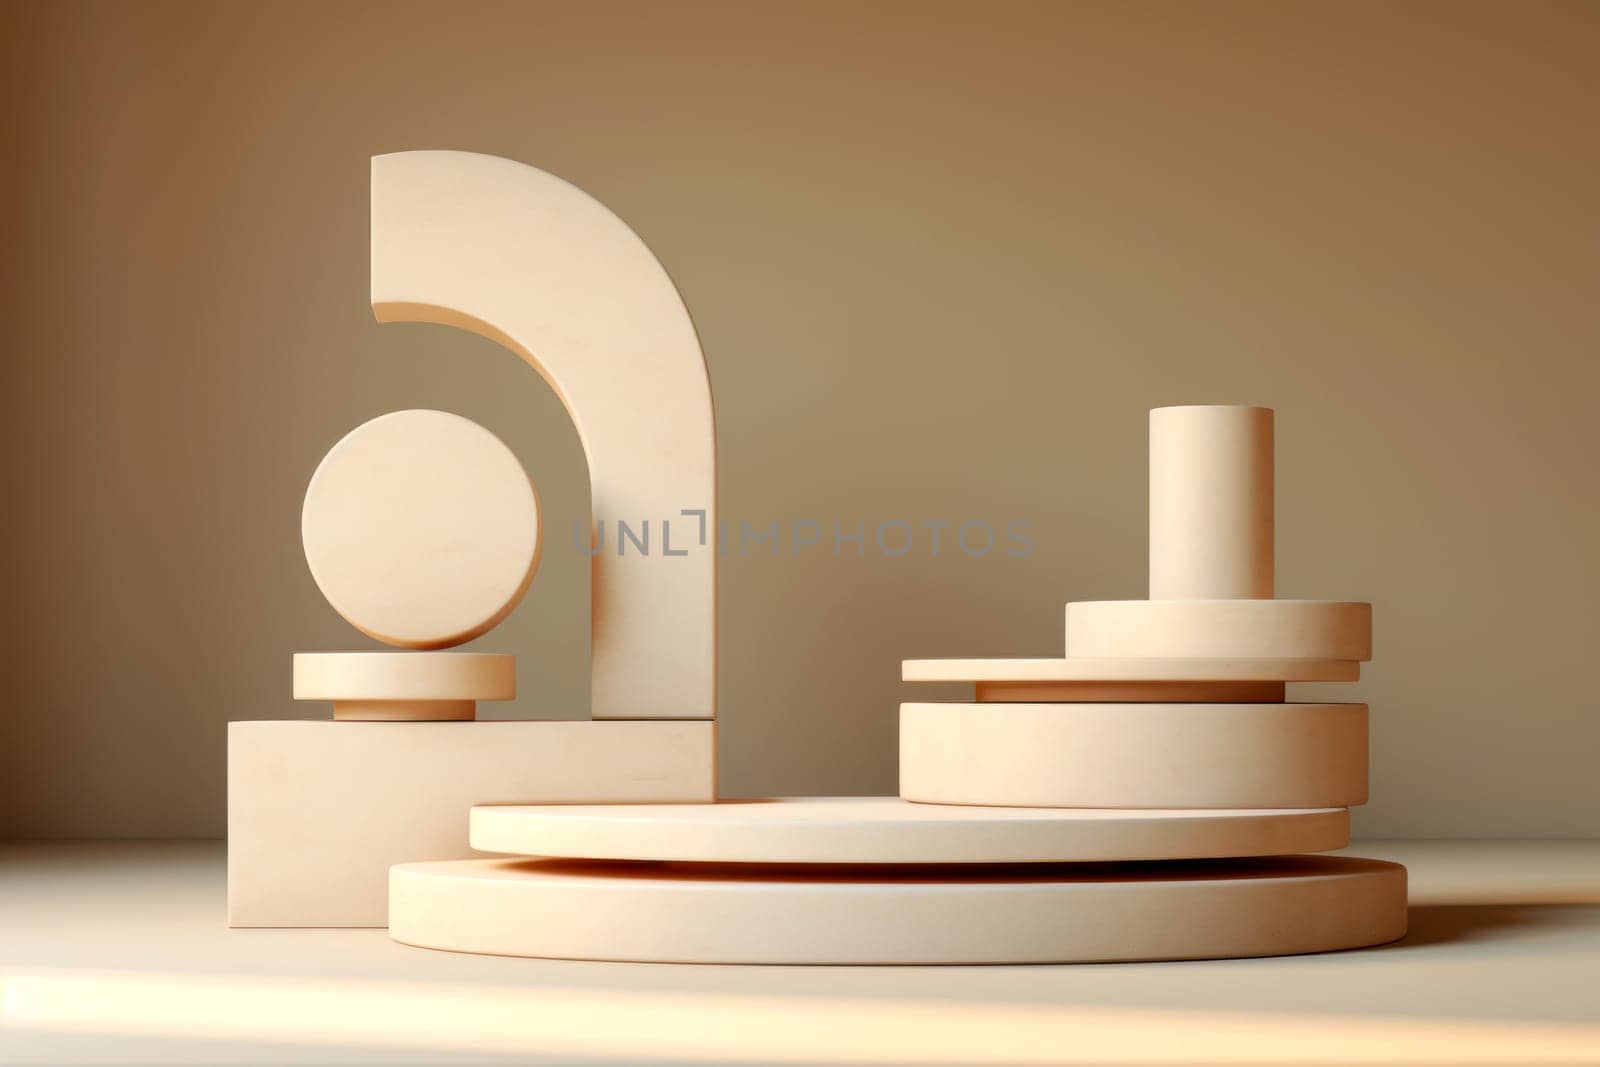 A composition of beige geometric shapes creating a minimalist display